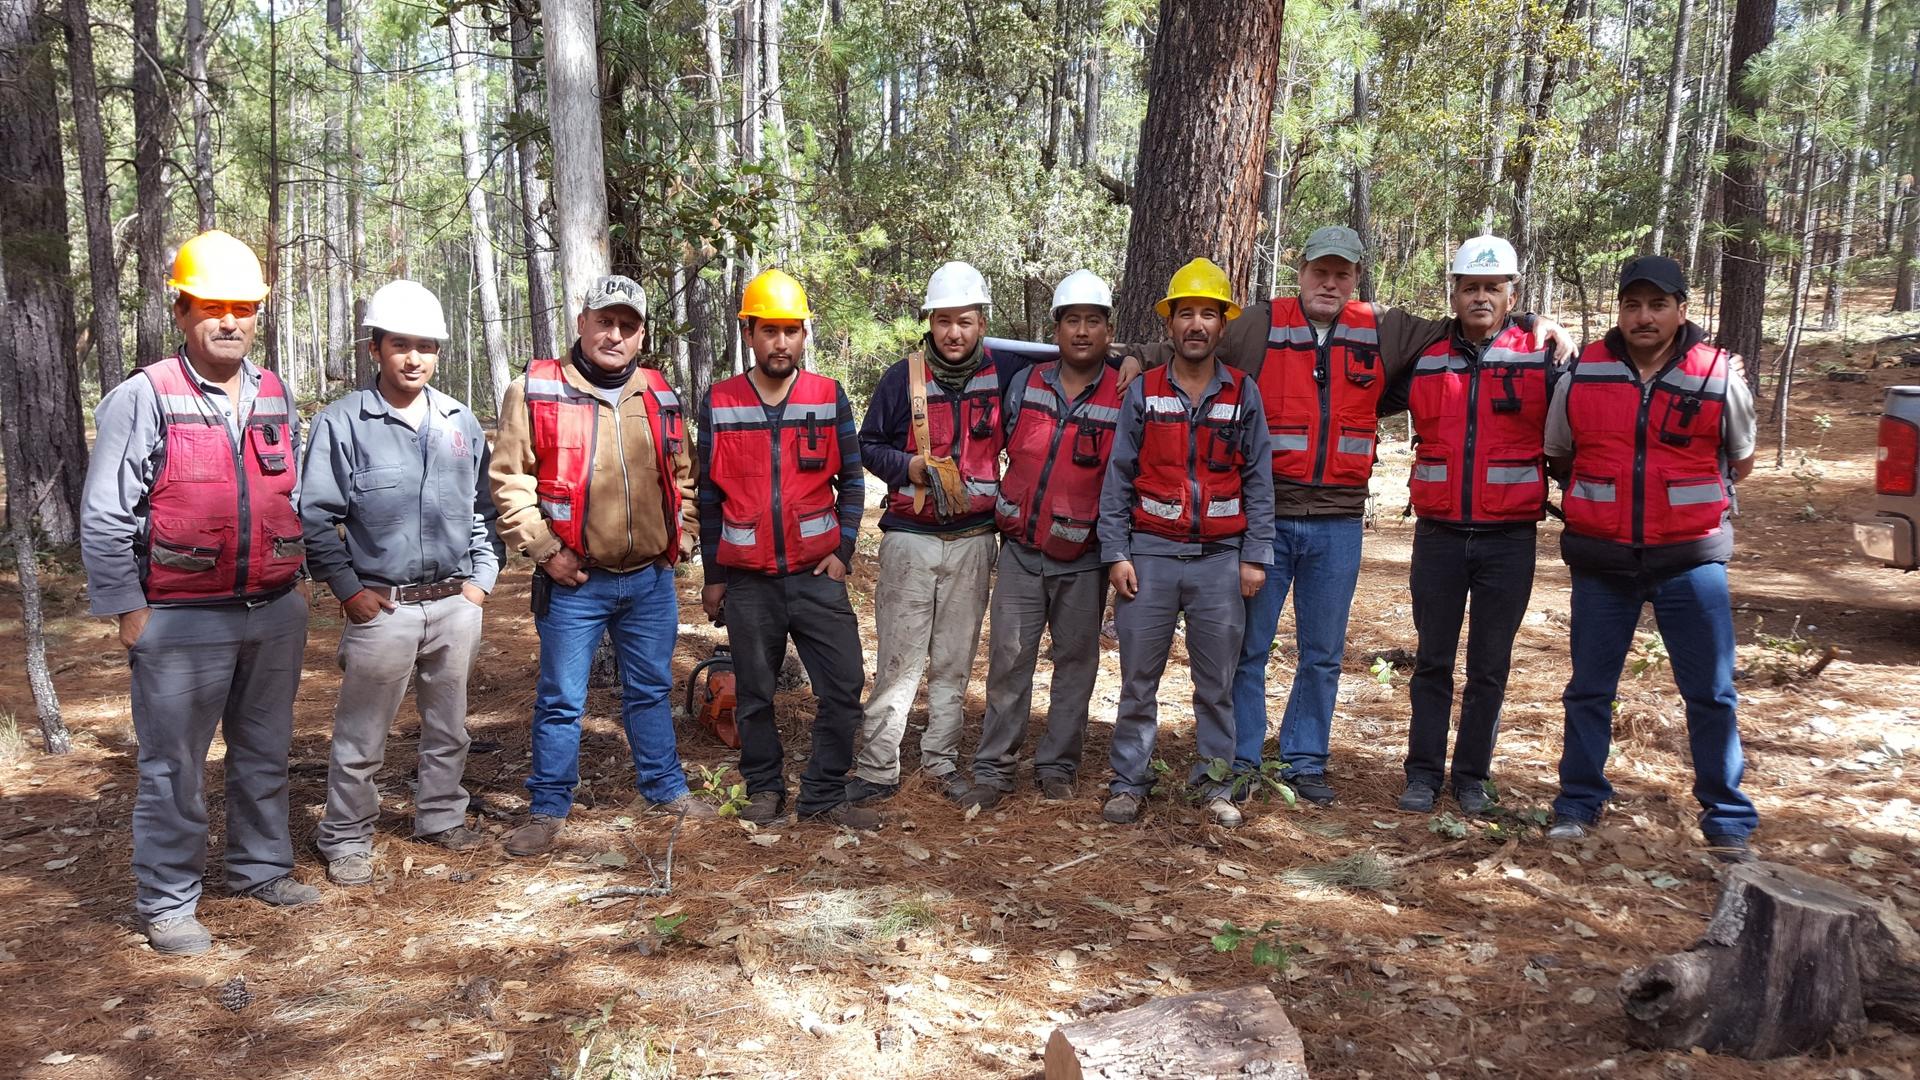 Foresters outdoors in hard hats and safety vests.